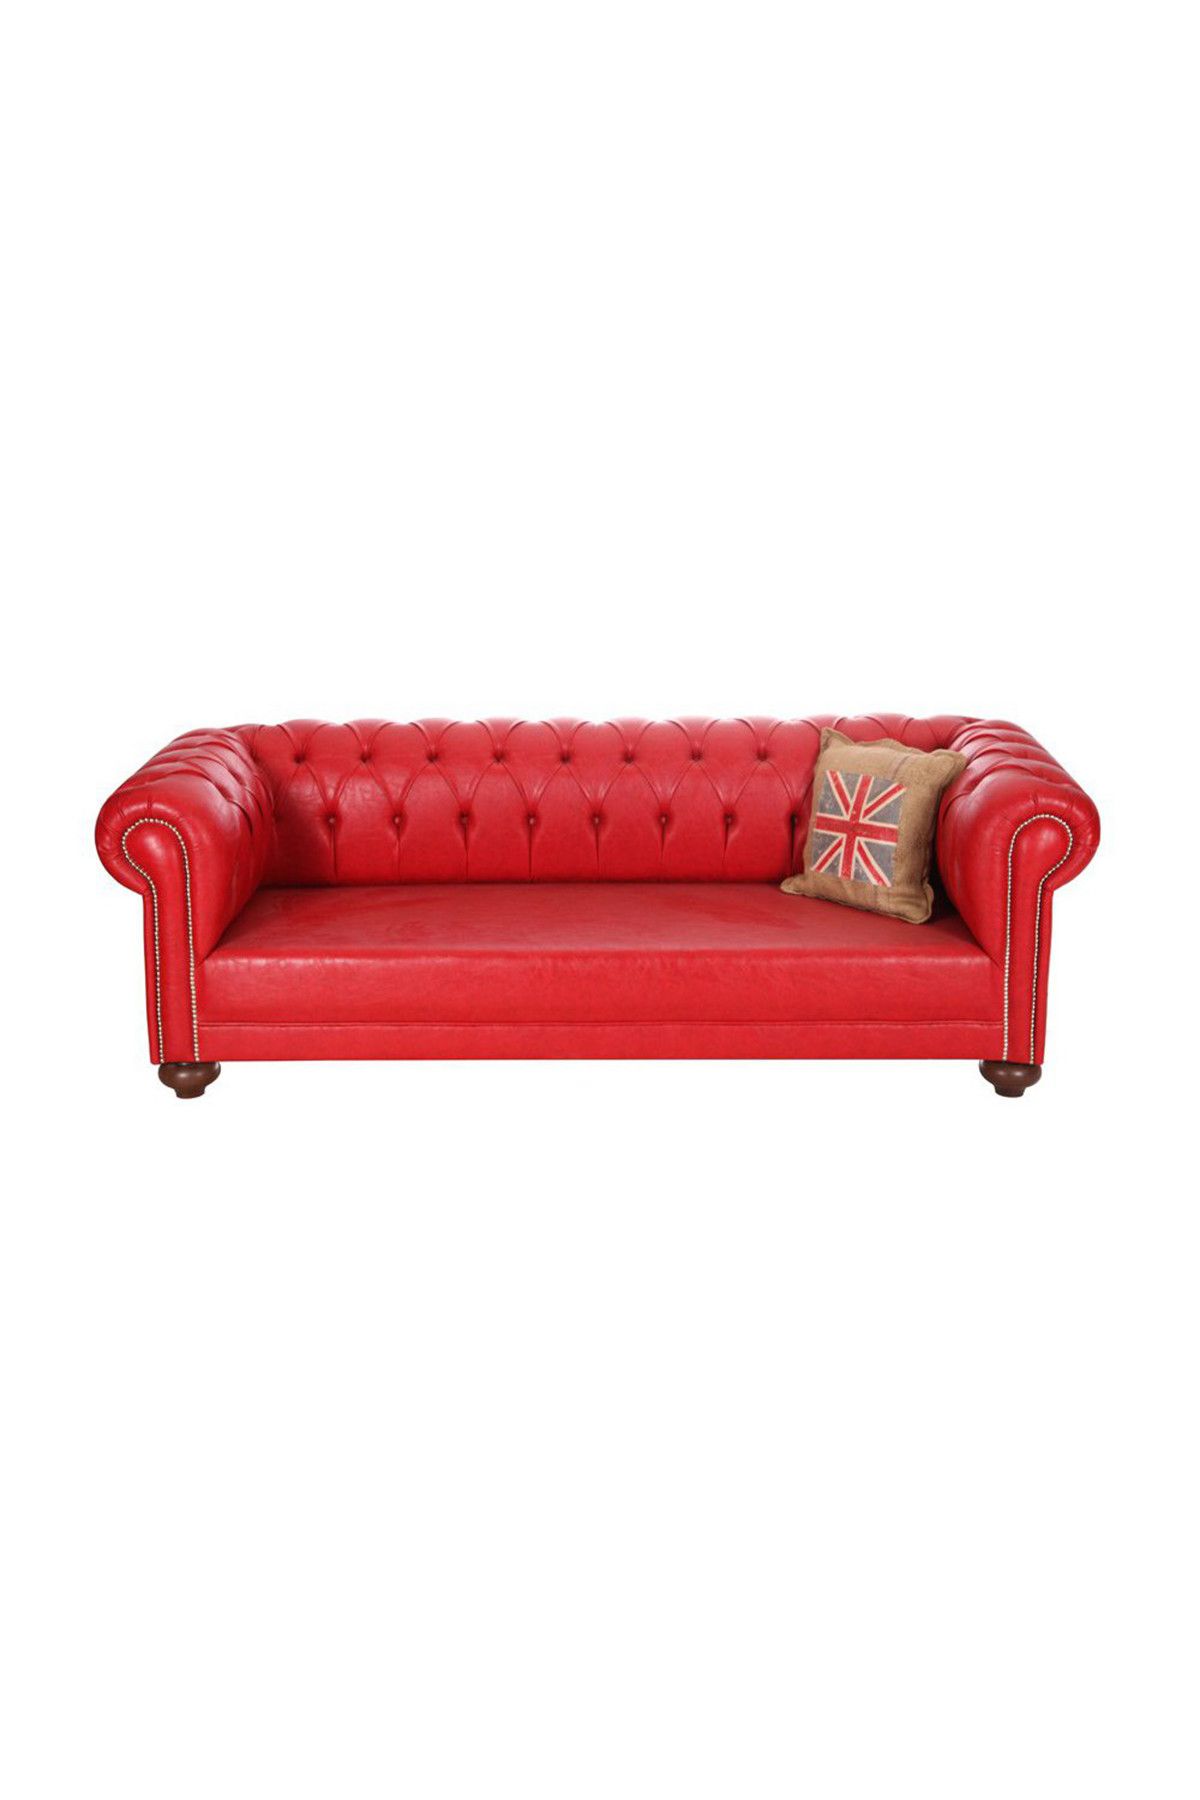 3A Mobilya Red Leather Chesterfield 230X90X80 CM